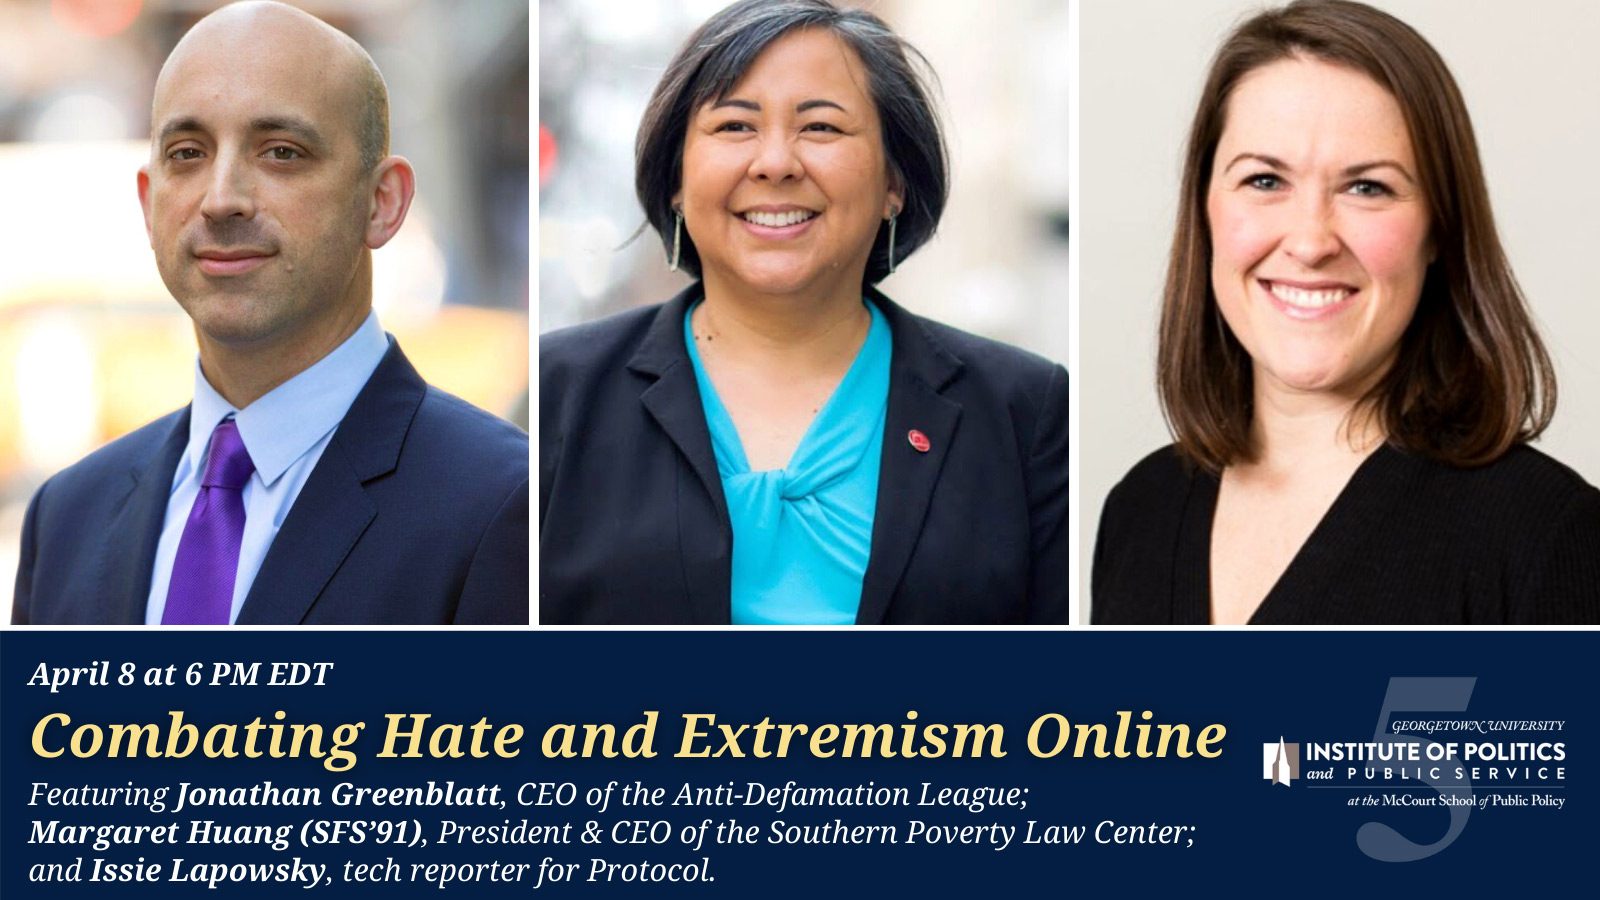 GU Politics hosted “Combating Hate and Extremism Online” with Jonathan Greenblatt from the Anti-Defamation League, Margaret Huang (SFS’91) from the Southern Poverty Law Center, and Issie Lapowsky, Senior Reporter for Protocol covering technology.